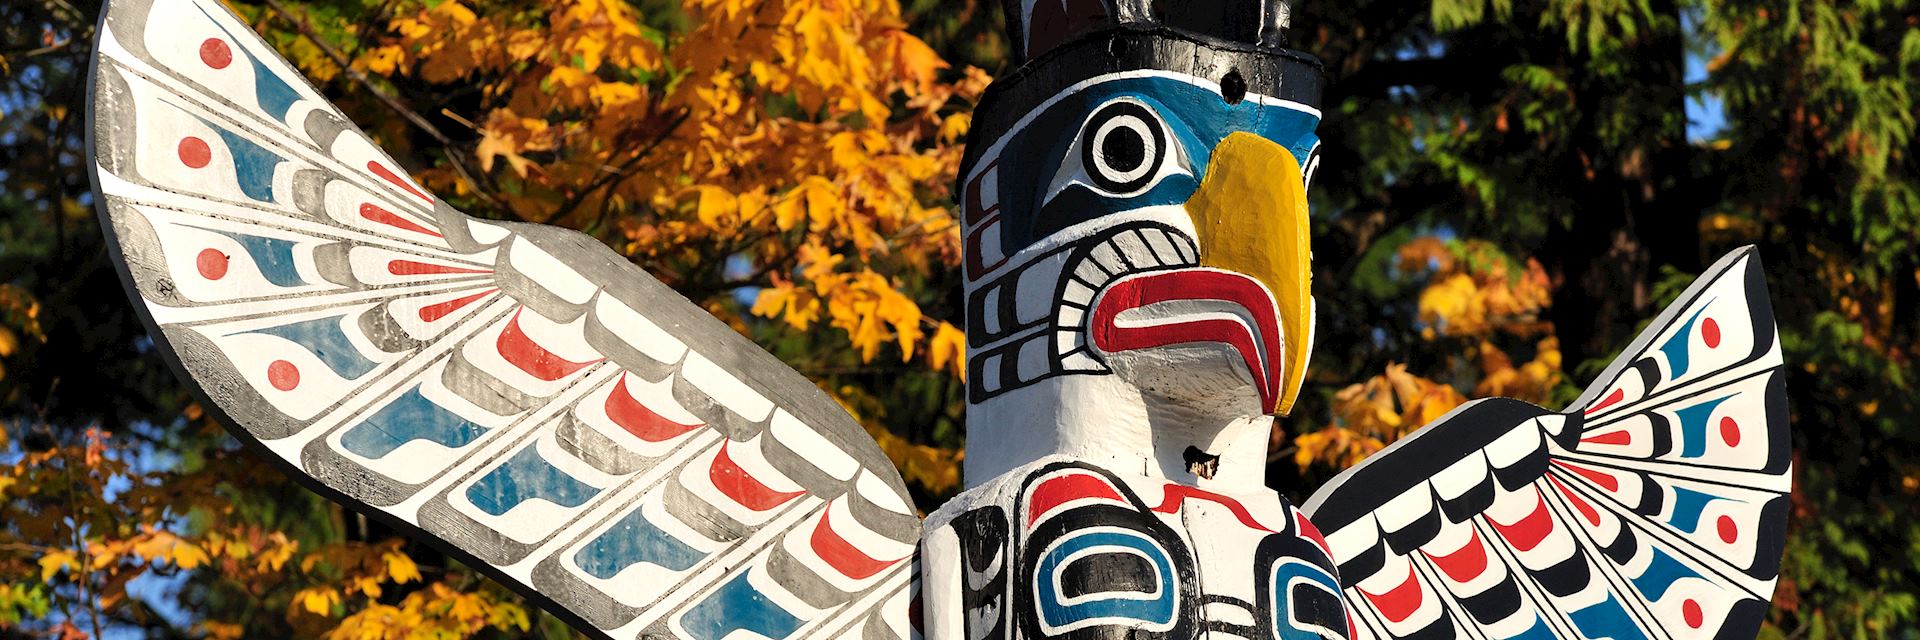 First Nations totem pole, Canada